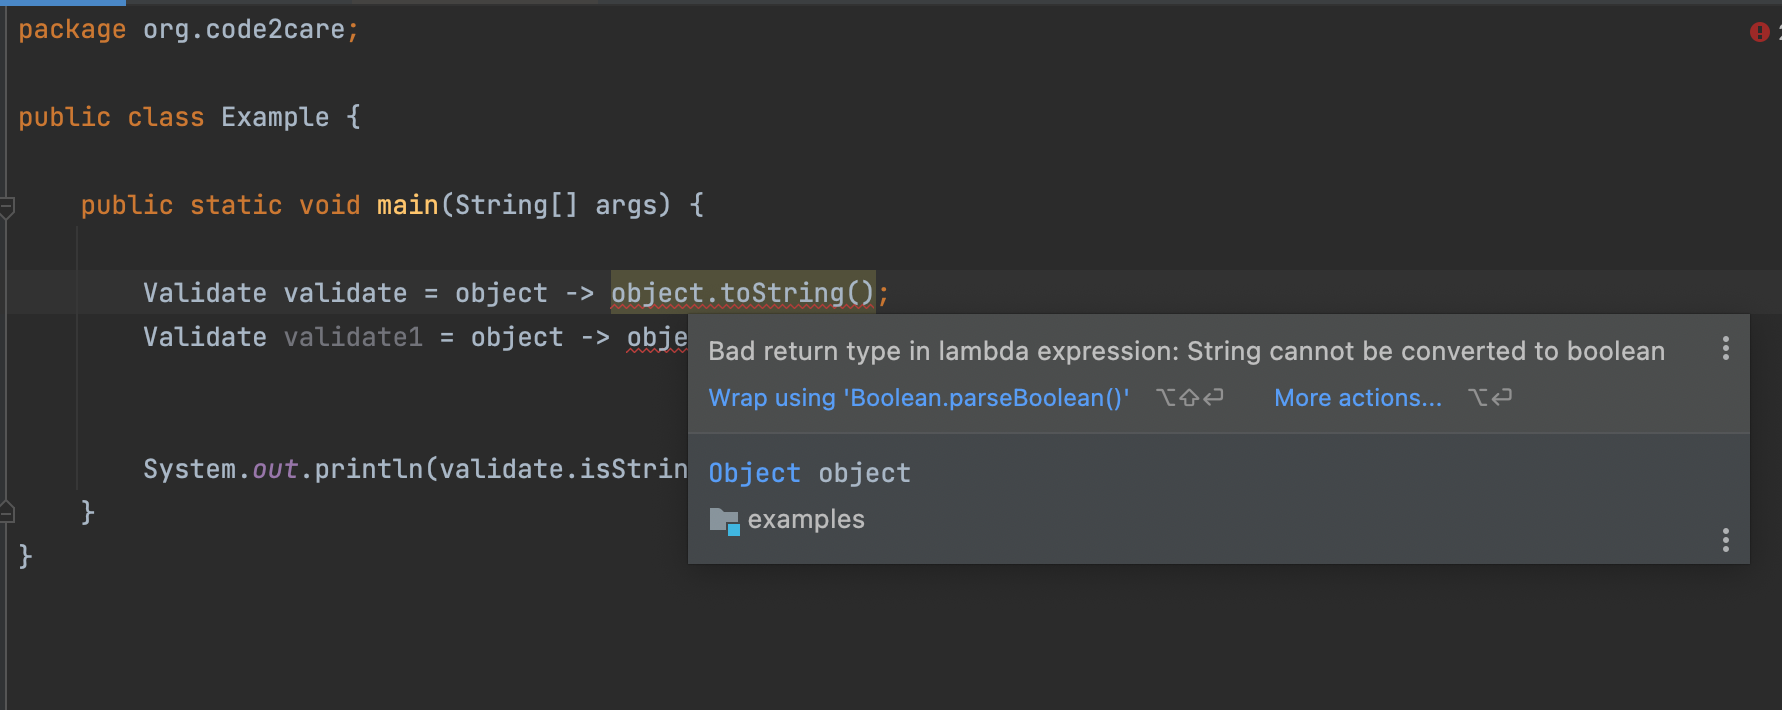 Java - Bad return type in lambda expression - String or int cannot be converted to boolean